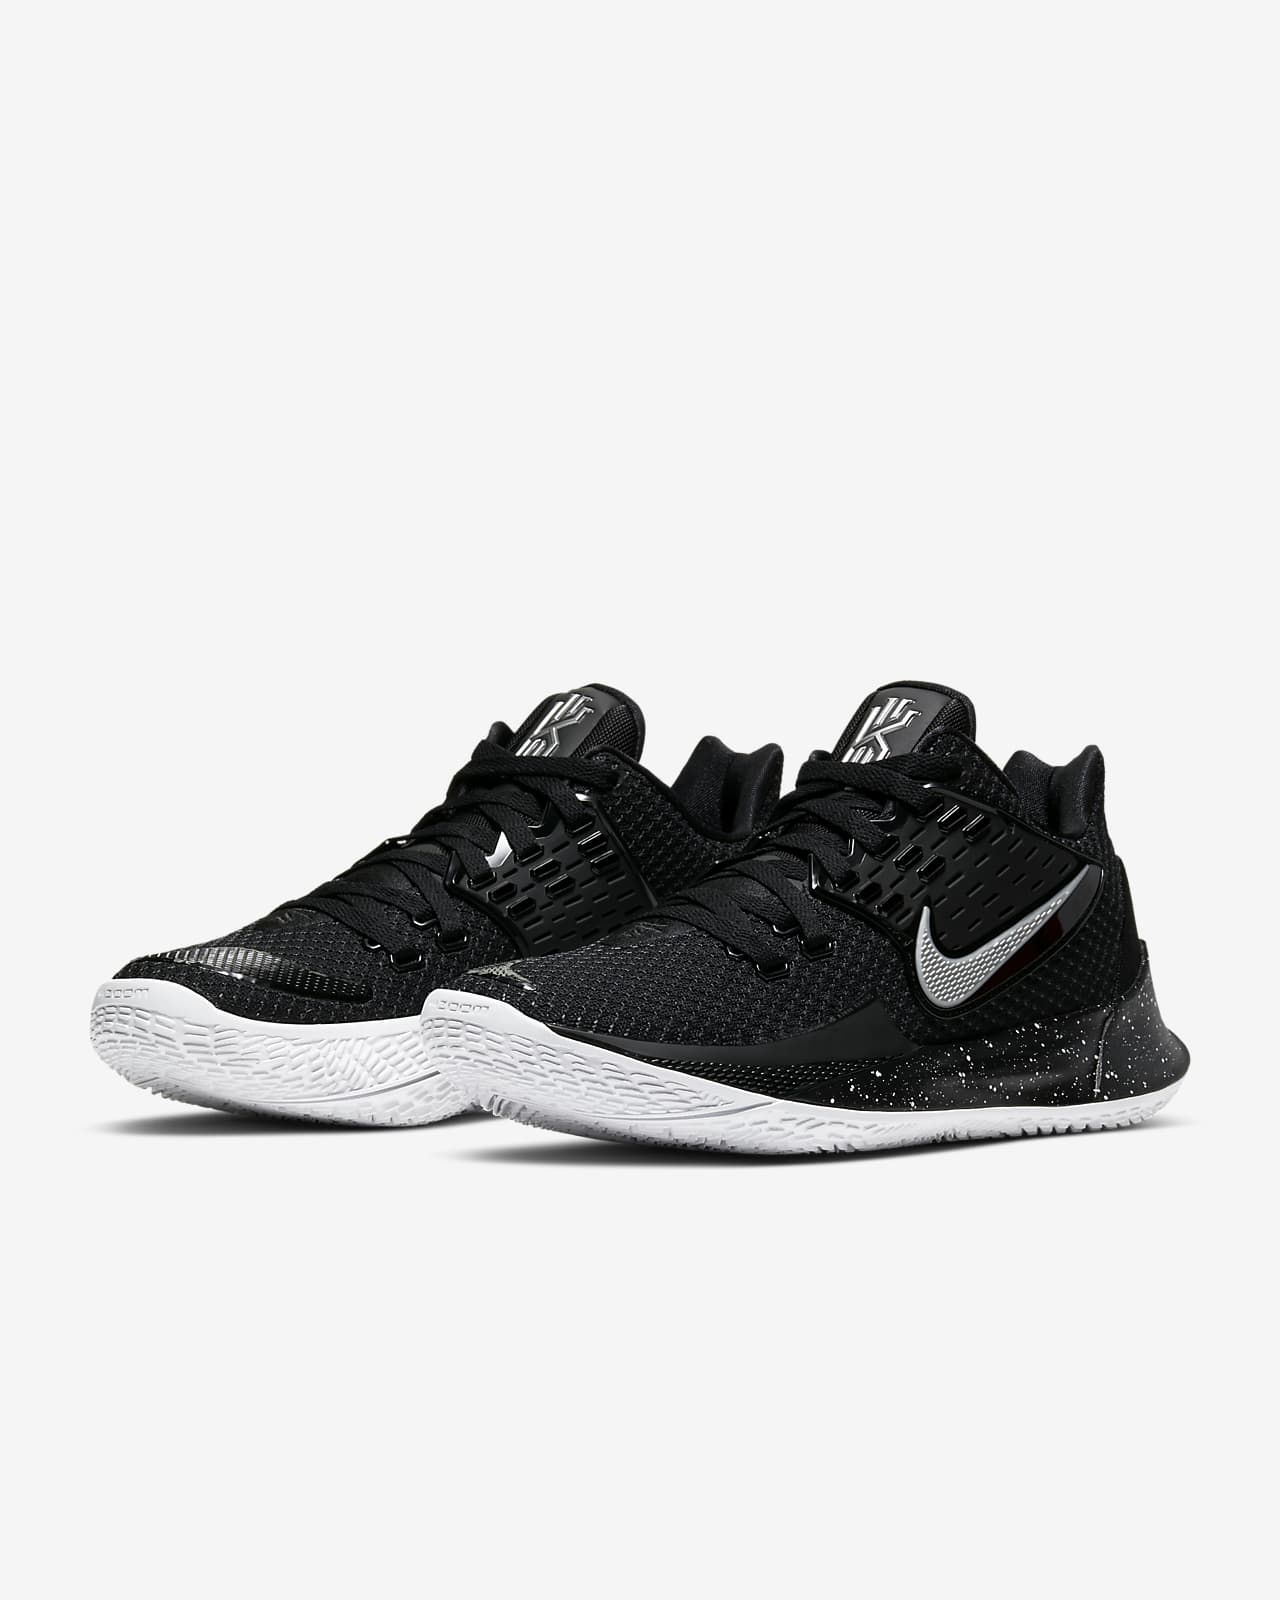 men's nike kyrie low 2 basketball shoes